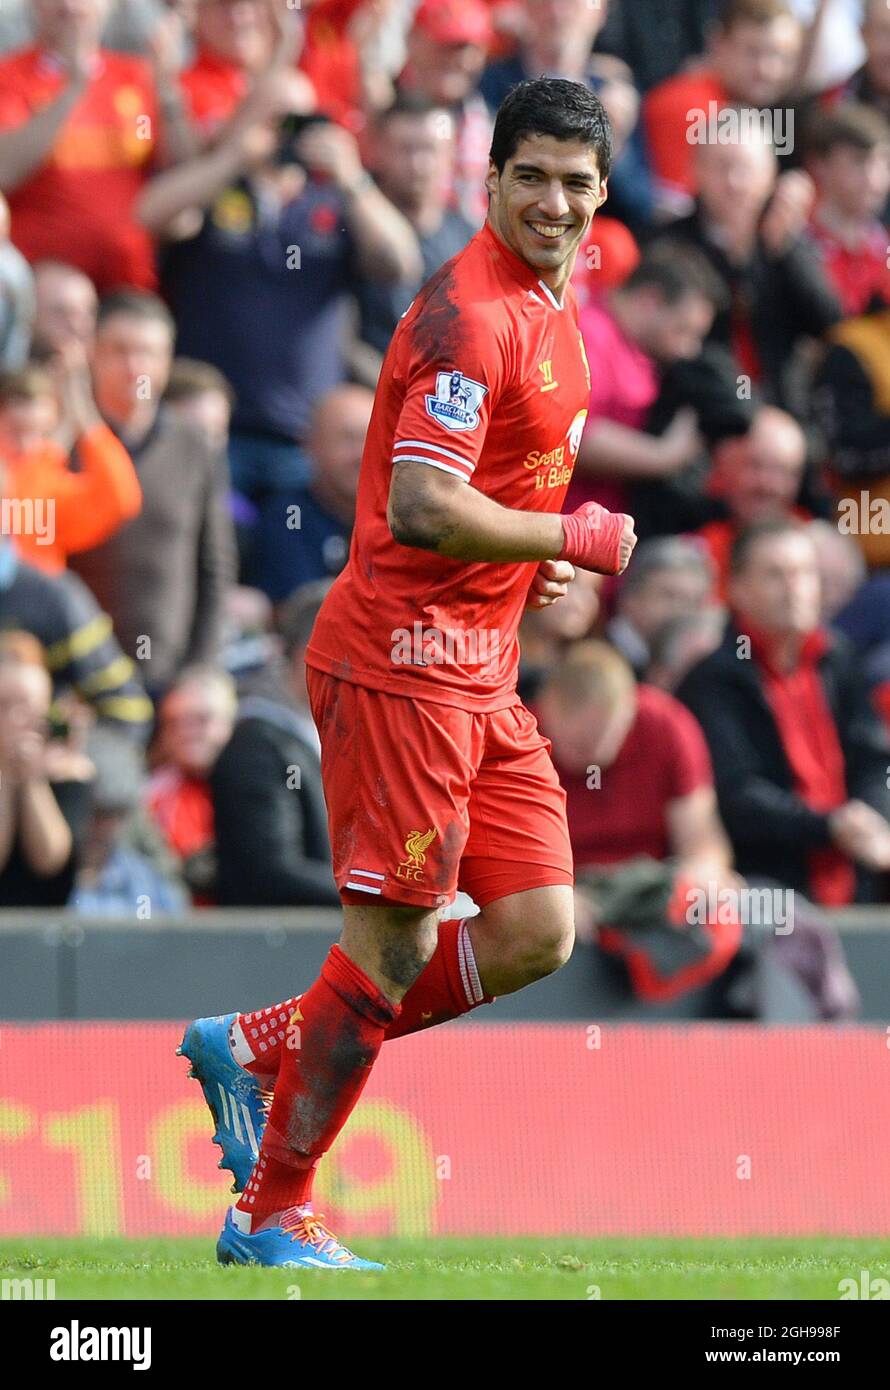 Luis Suarez of Liverpool celebrates scoring the second goal during the Barclays Premier League match between Liverpool and Tottenham at the Anfield Stadium in Liverpool, England on March 30, 2014. Stock Photo